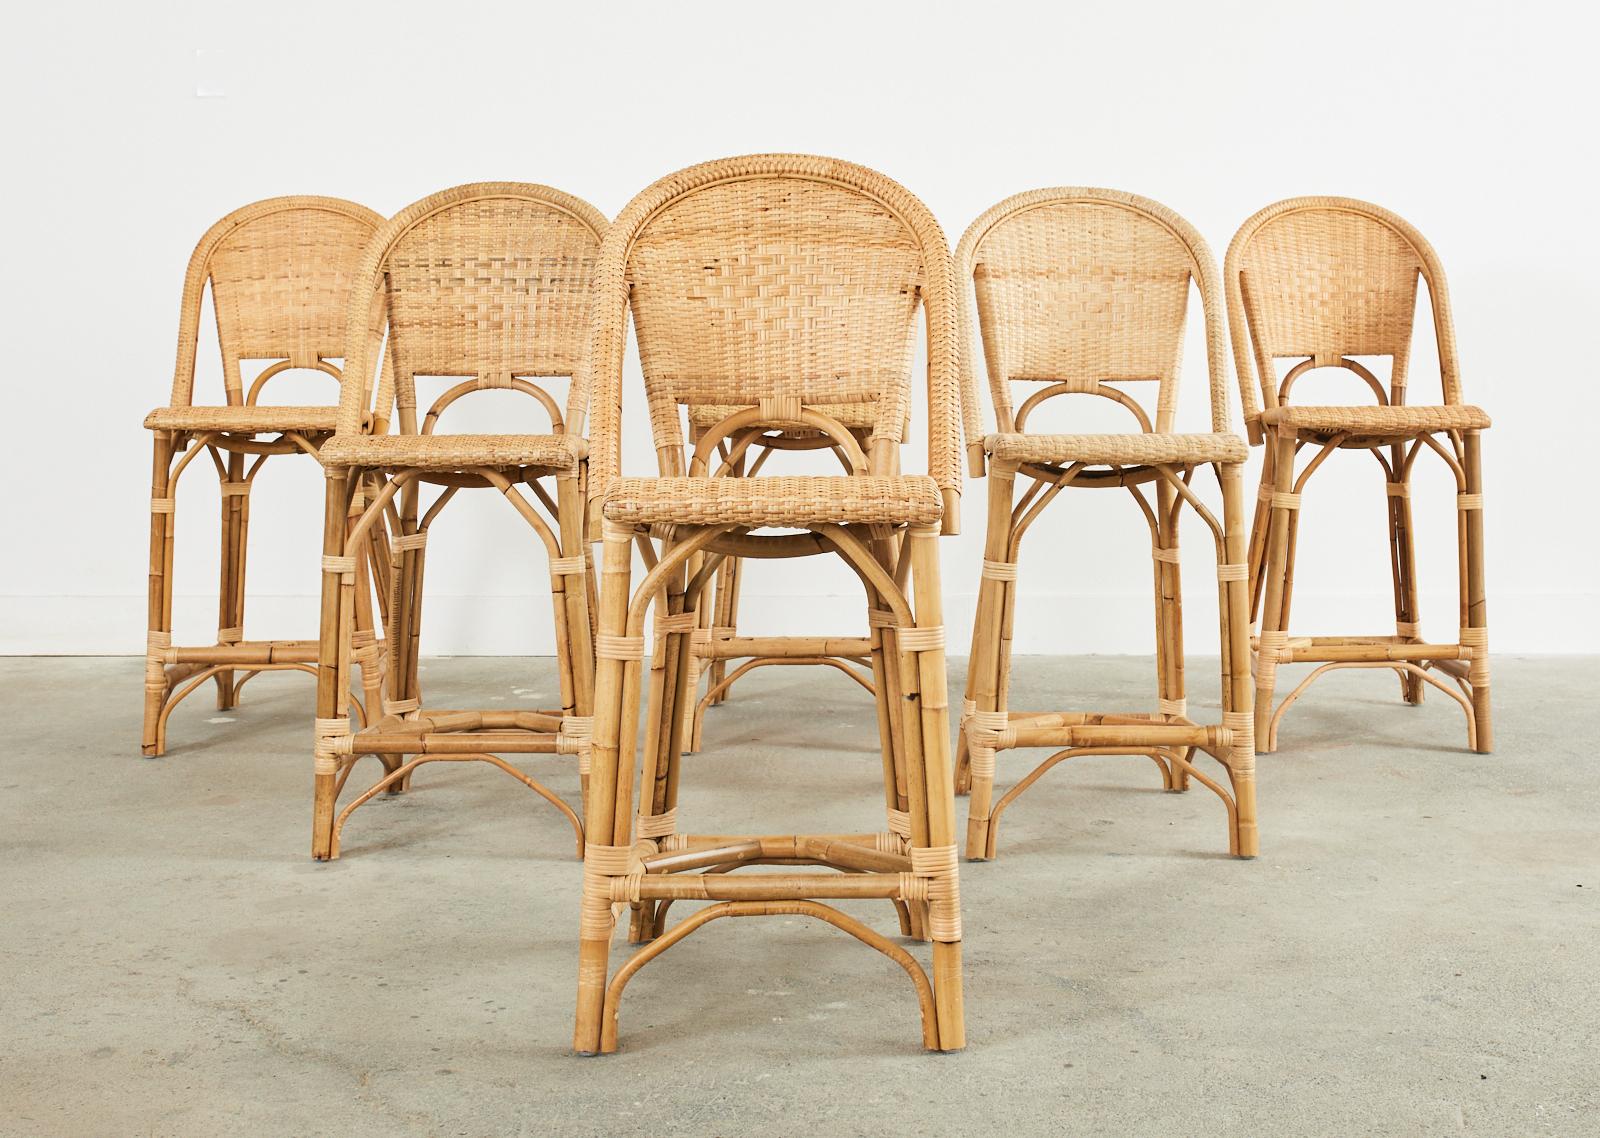 Charming set of six Parisian style bistro cafe barstools crafted from rattan and woven wicker by Serena and Lily. Made in the organic modern style featuring gracefully bent rattan frames covered with woven wicker in a natural rattan finish. Near new